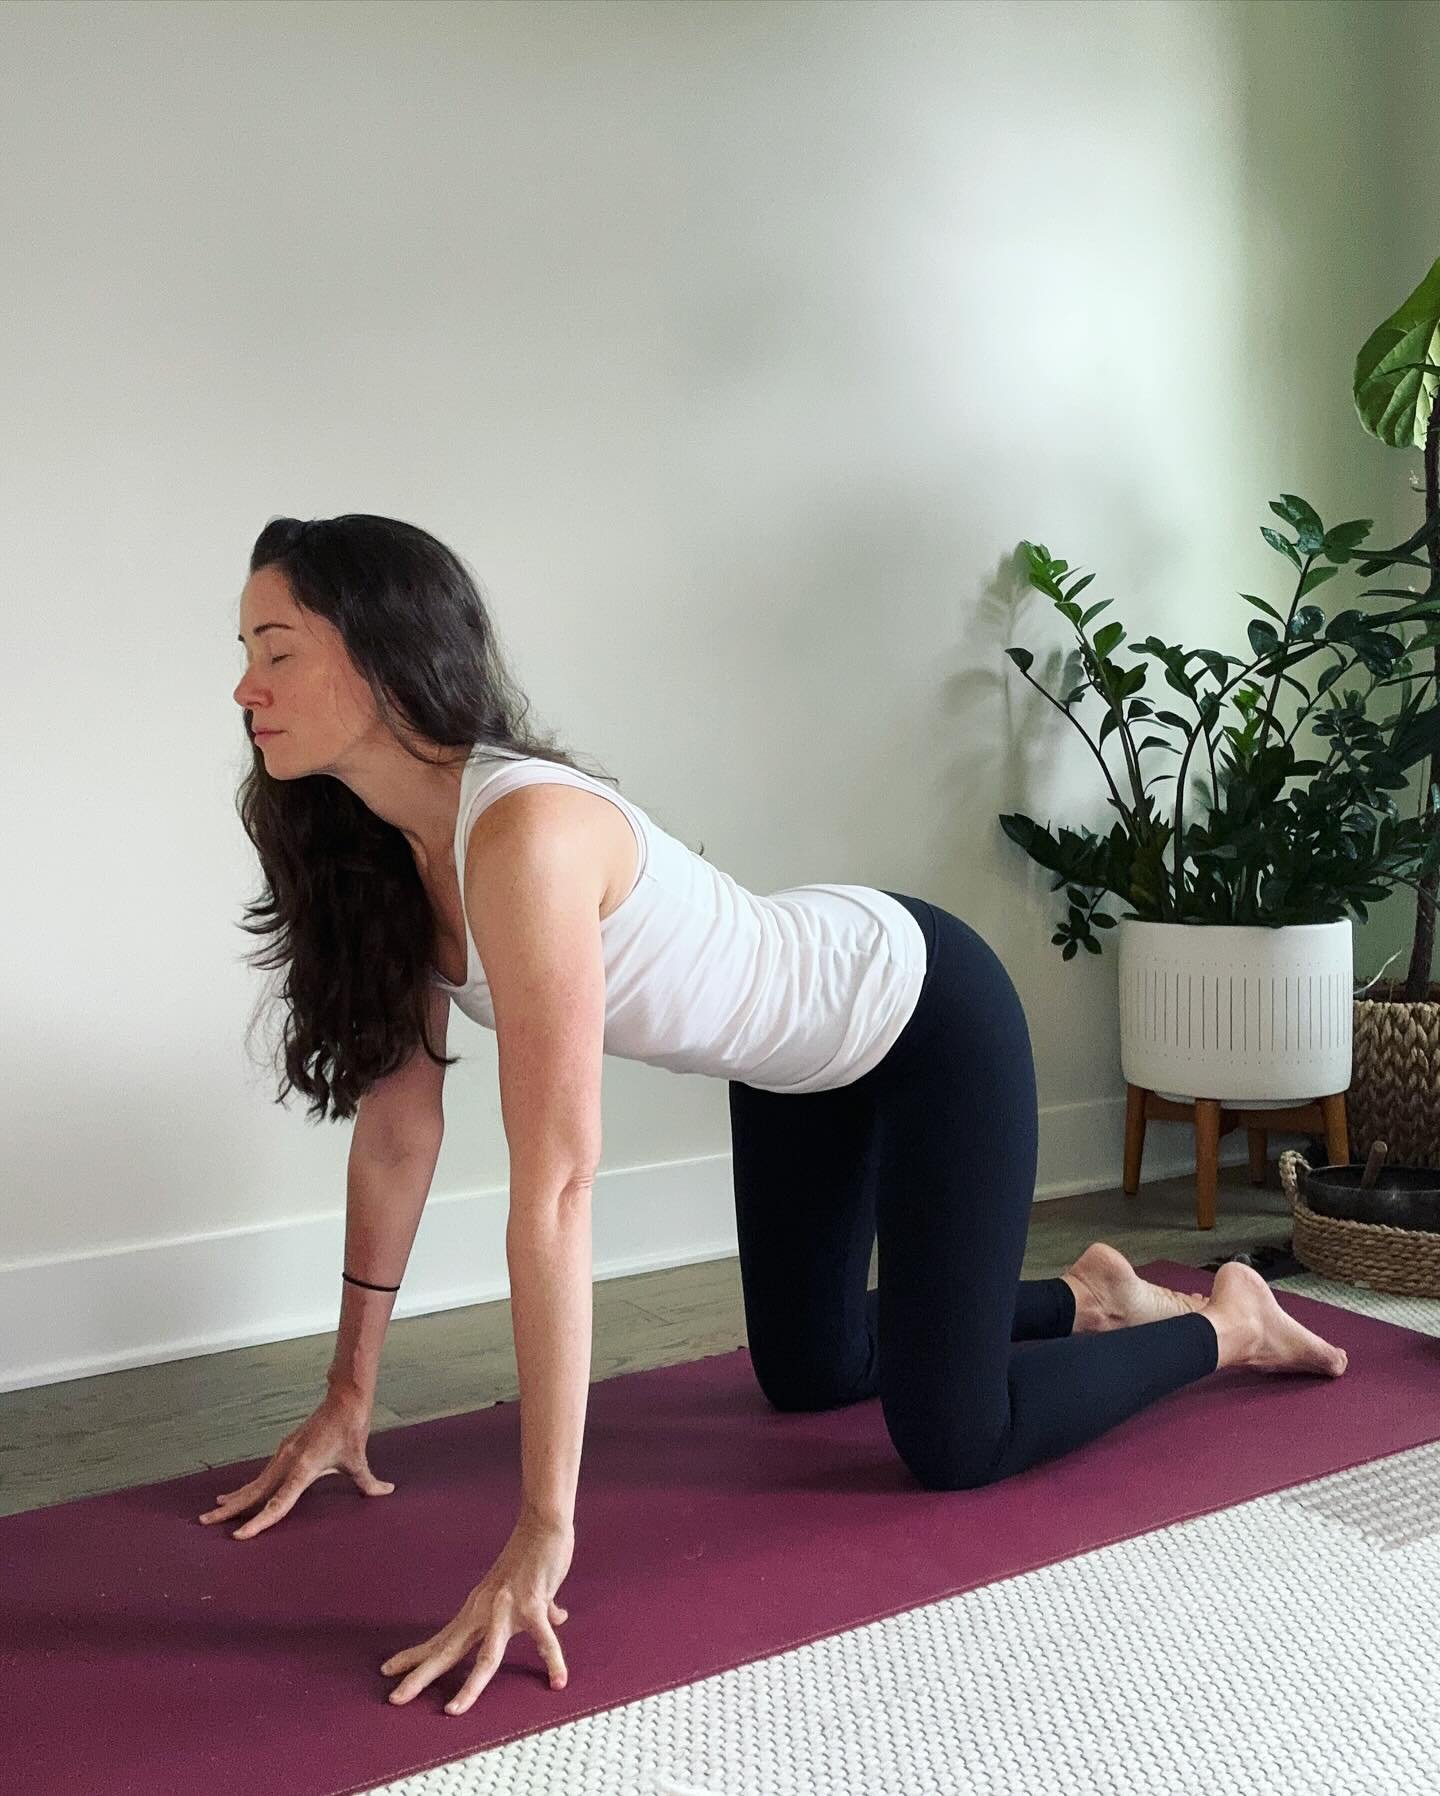 Cat/Cow may be one of my absolute favorite poses. Simple yet effective for stretching the body. 

Do you have a favorite version? 

#yogaposes #yogaforeveryone #yogainspiration #yogateacher #yogaeveryday #yogalife #yogalove #yoga #yoganashville #yoga